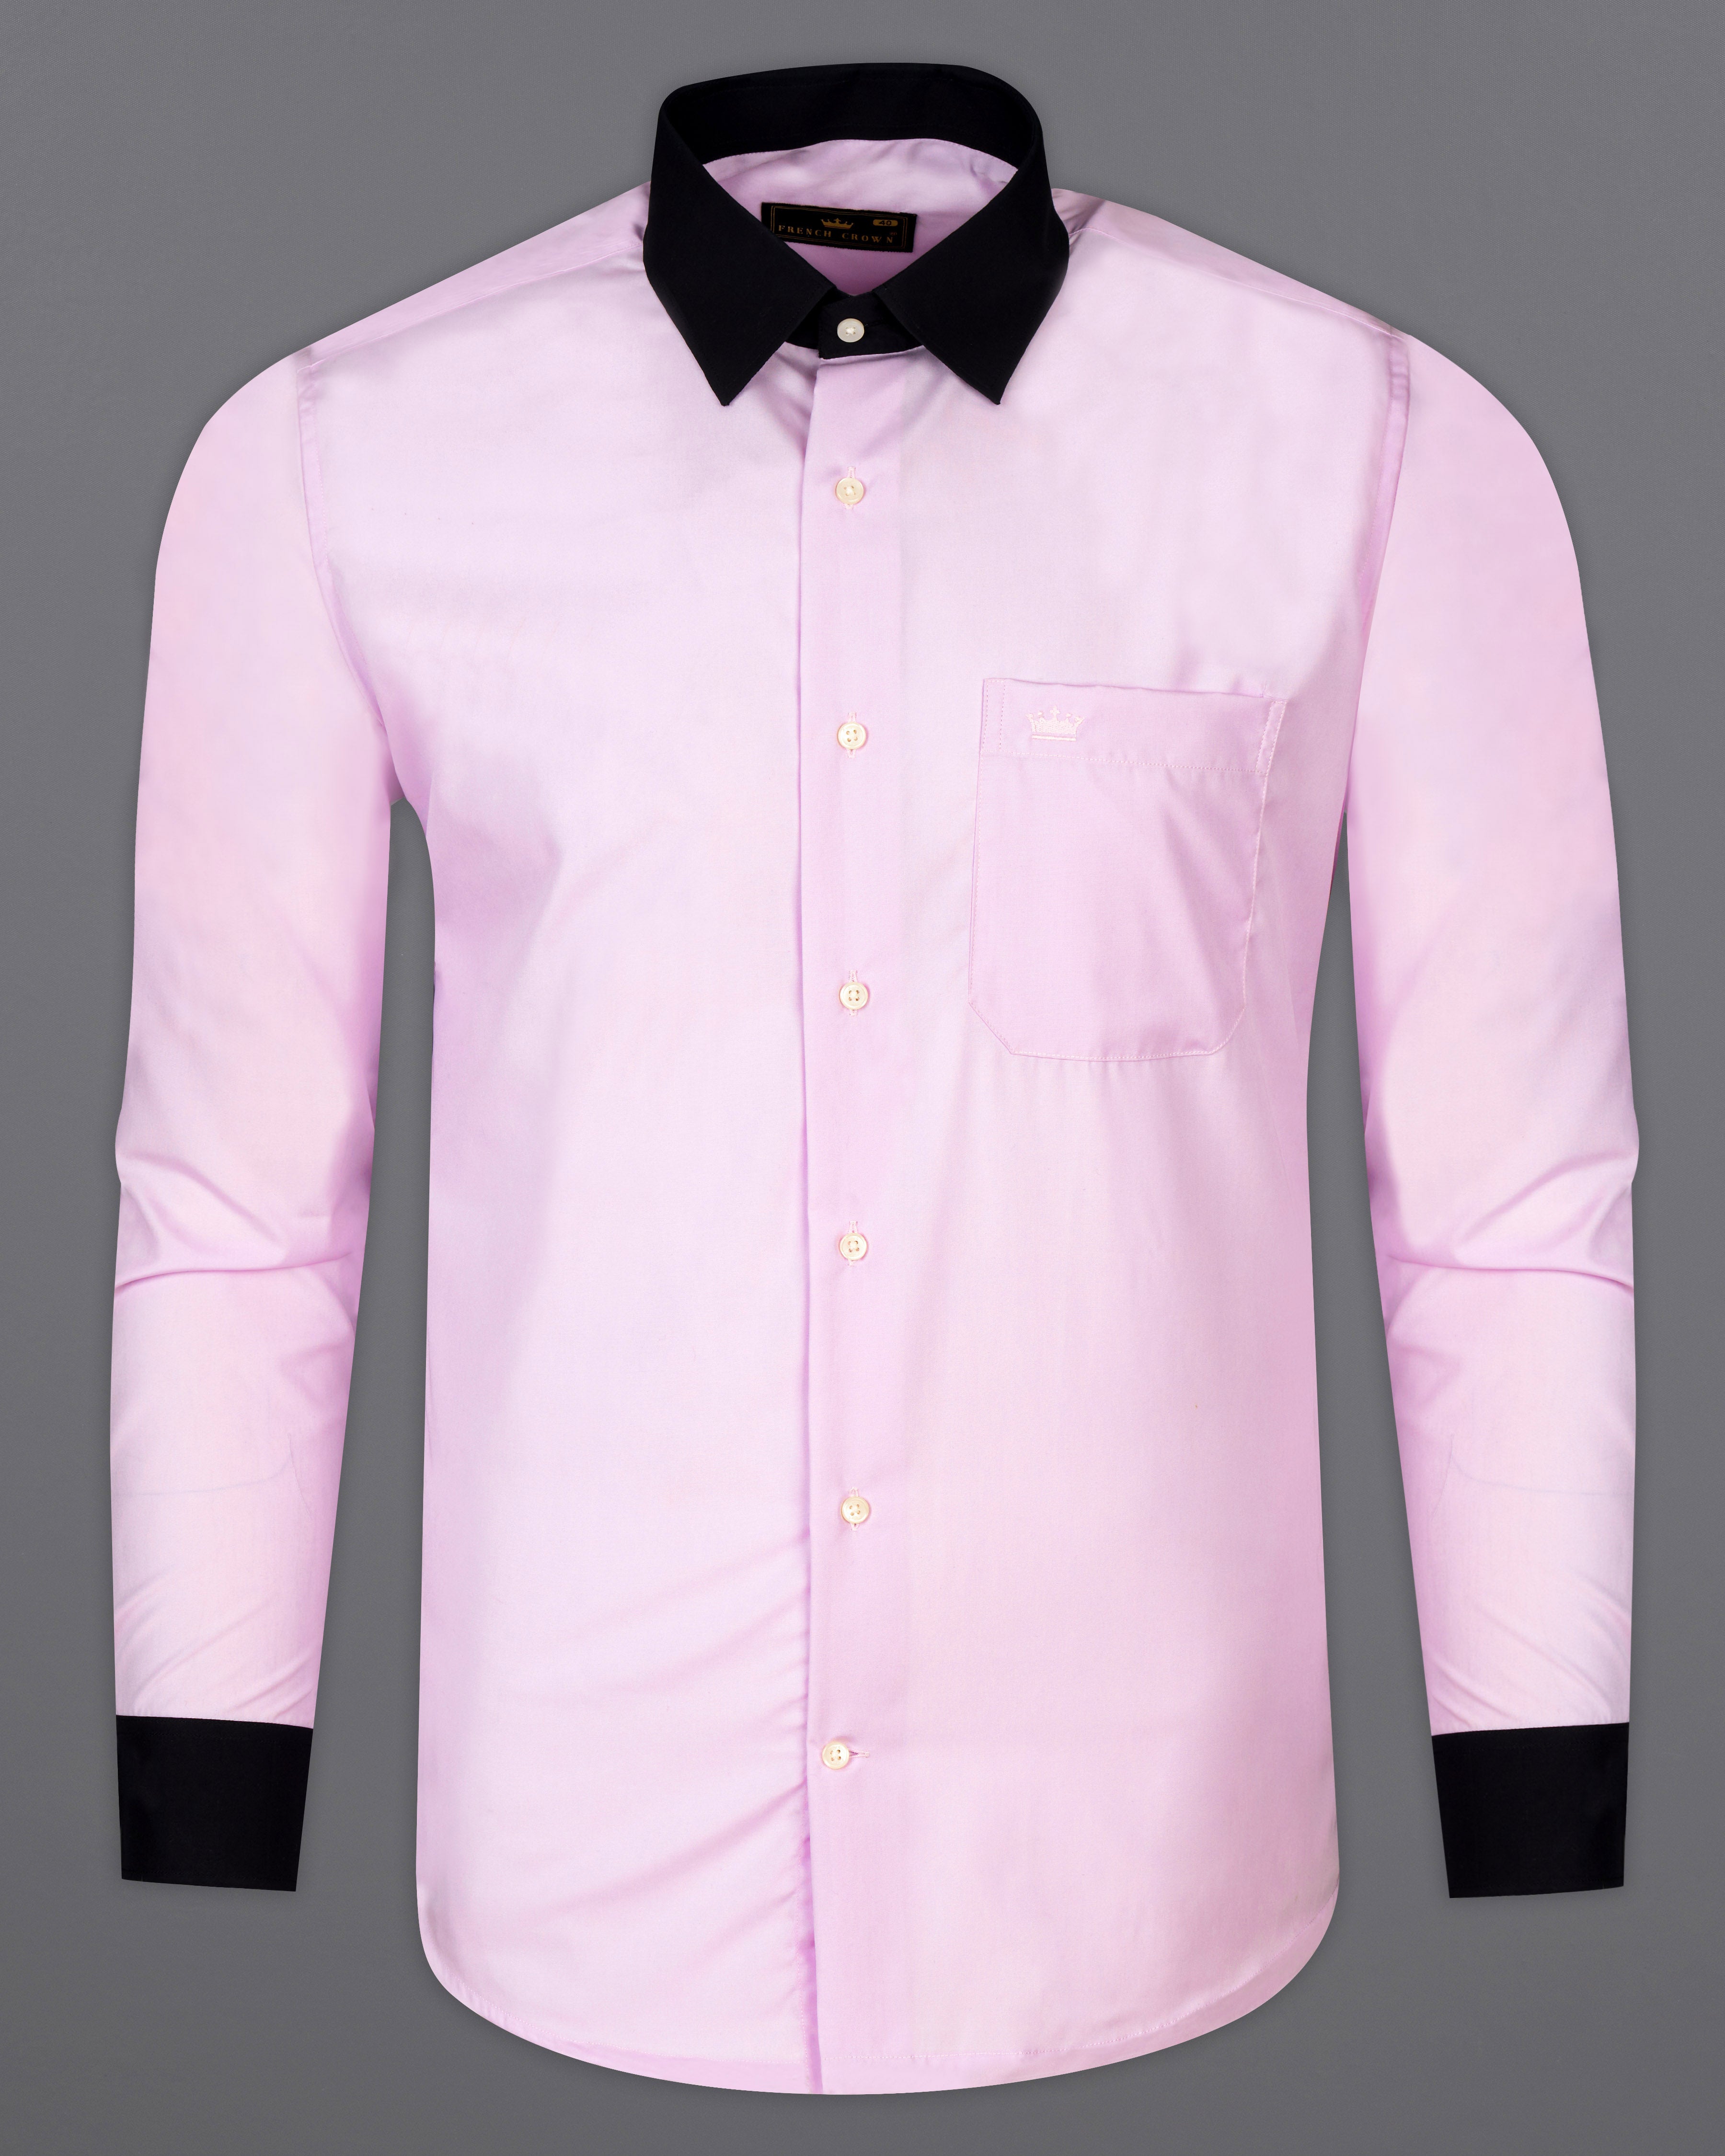 Pastel Pink with Black Collar and Cuff Premium Cotton Shirt 9749-BCC-38, 9749-BCC-H-38, 9749-BCC-39, 9749-BCC-H-39, 9749-BCC-40, 9749-BCC-H-40, 9749-BCC-42, 9749-BCC-H-42, 9749-BCC-44, 9749-BCC-H-44, 9749-BCC-46, 9749-BCC-H-46, 9749-BCC-48, 9749-BCC-H-48, 9749-BCC-50, 9749-BCC-H-50, 9749-BCC-52, 9749-BCC-H-52